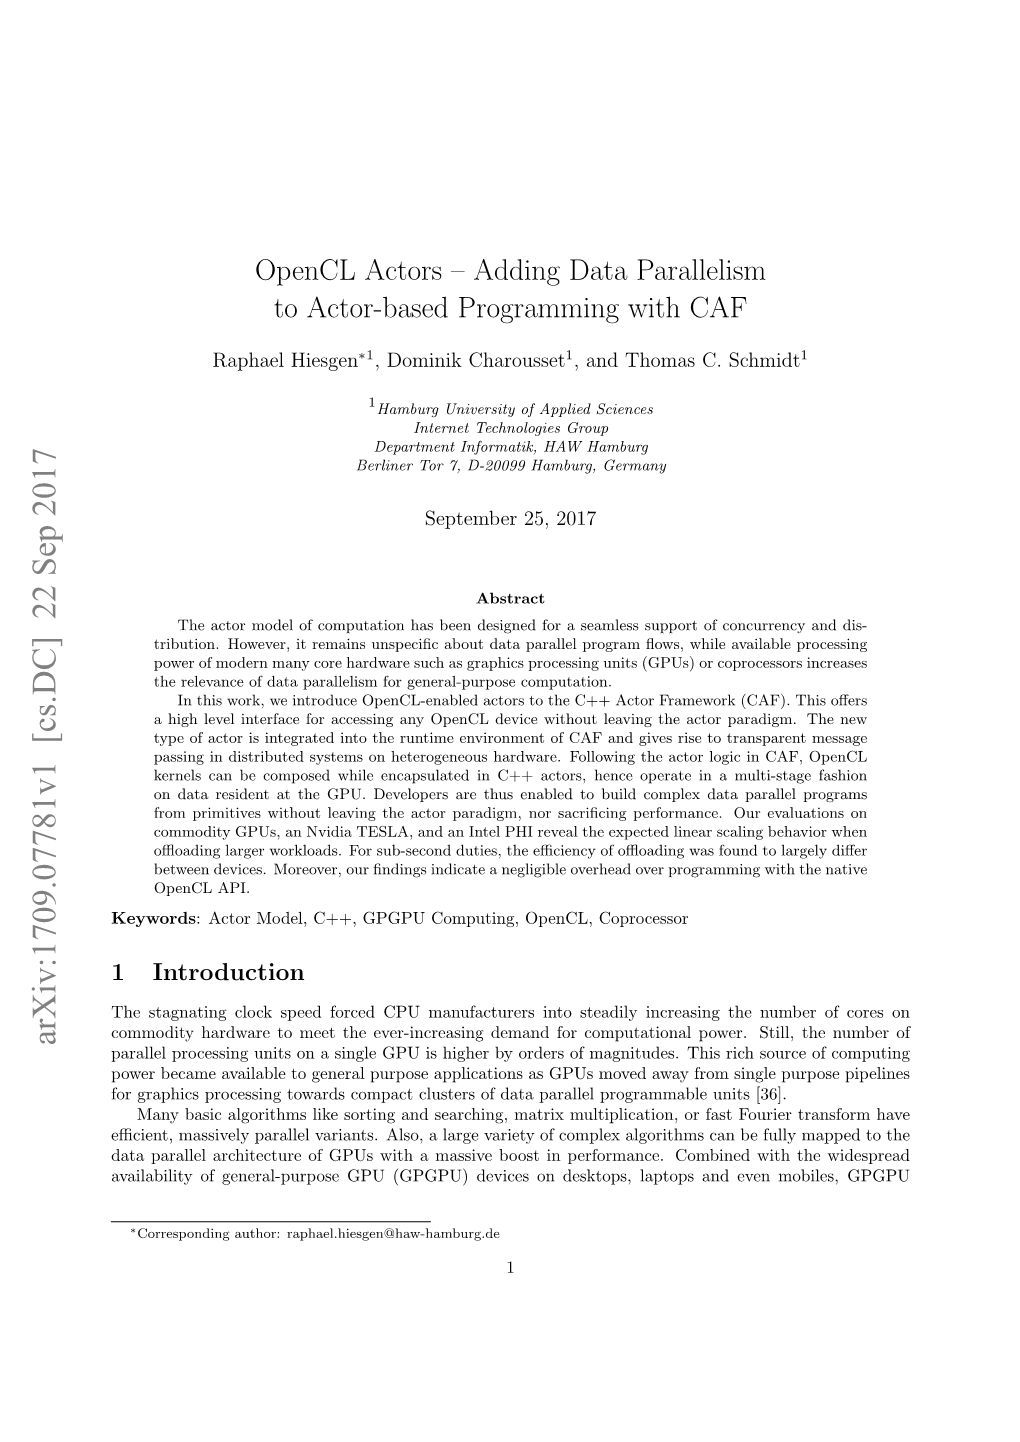 Opencl Actors-Adding Data Parallelism to Actor-Based Programming With